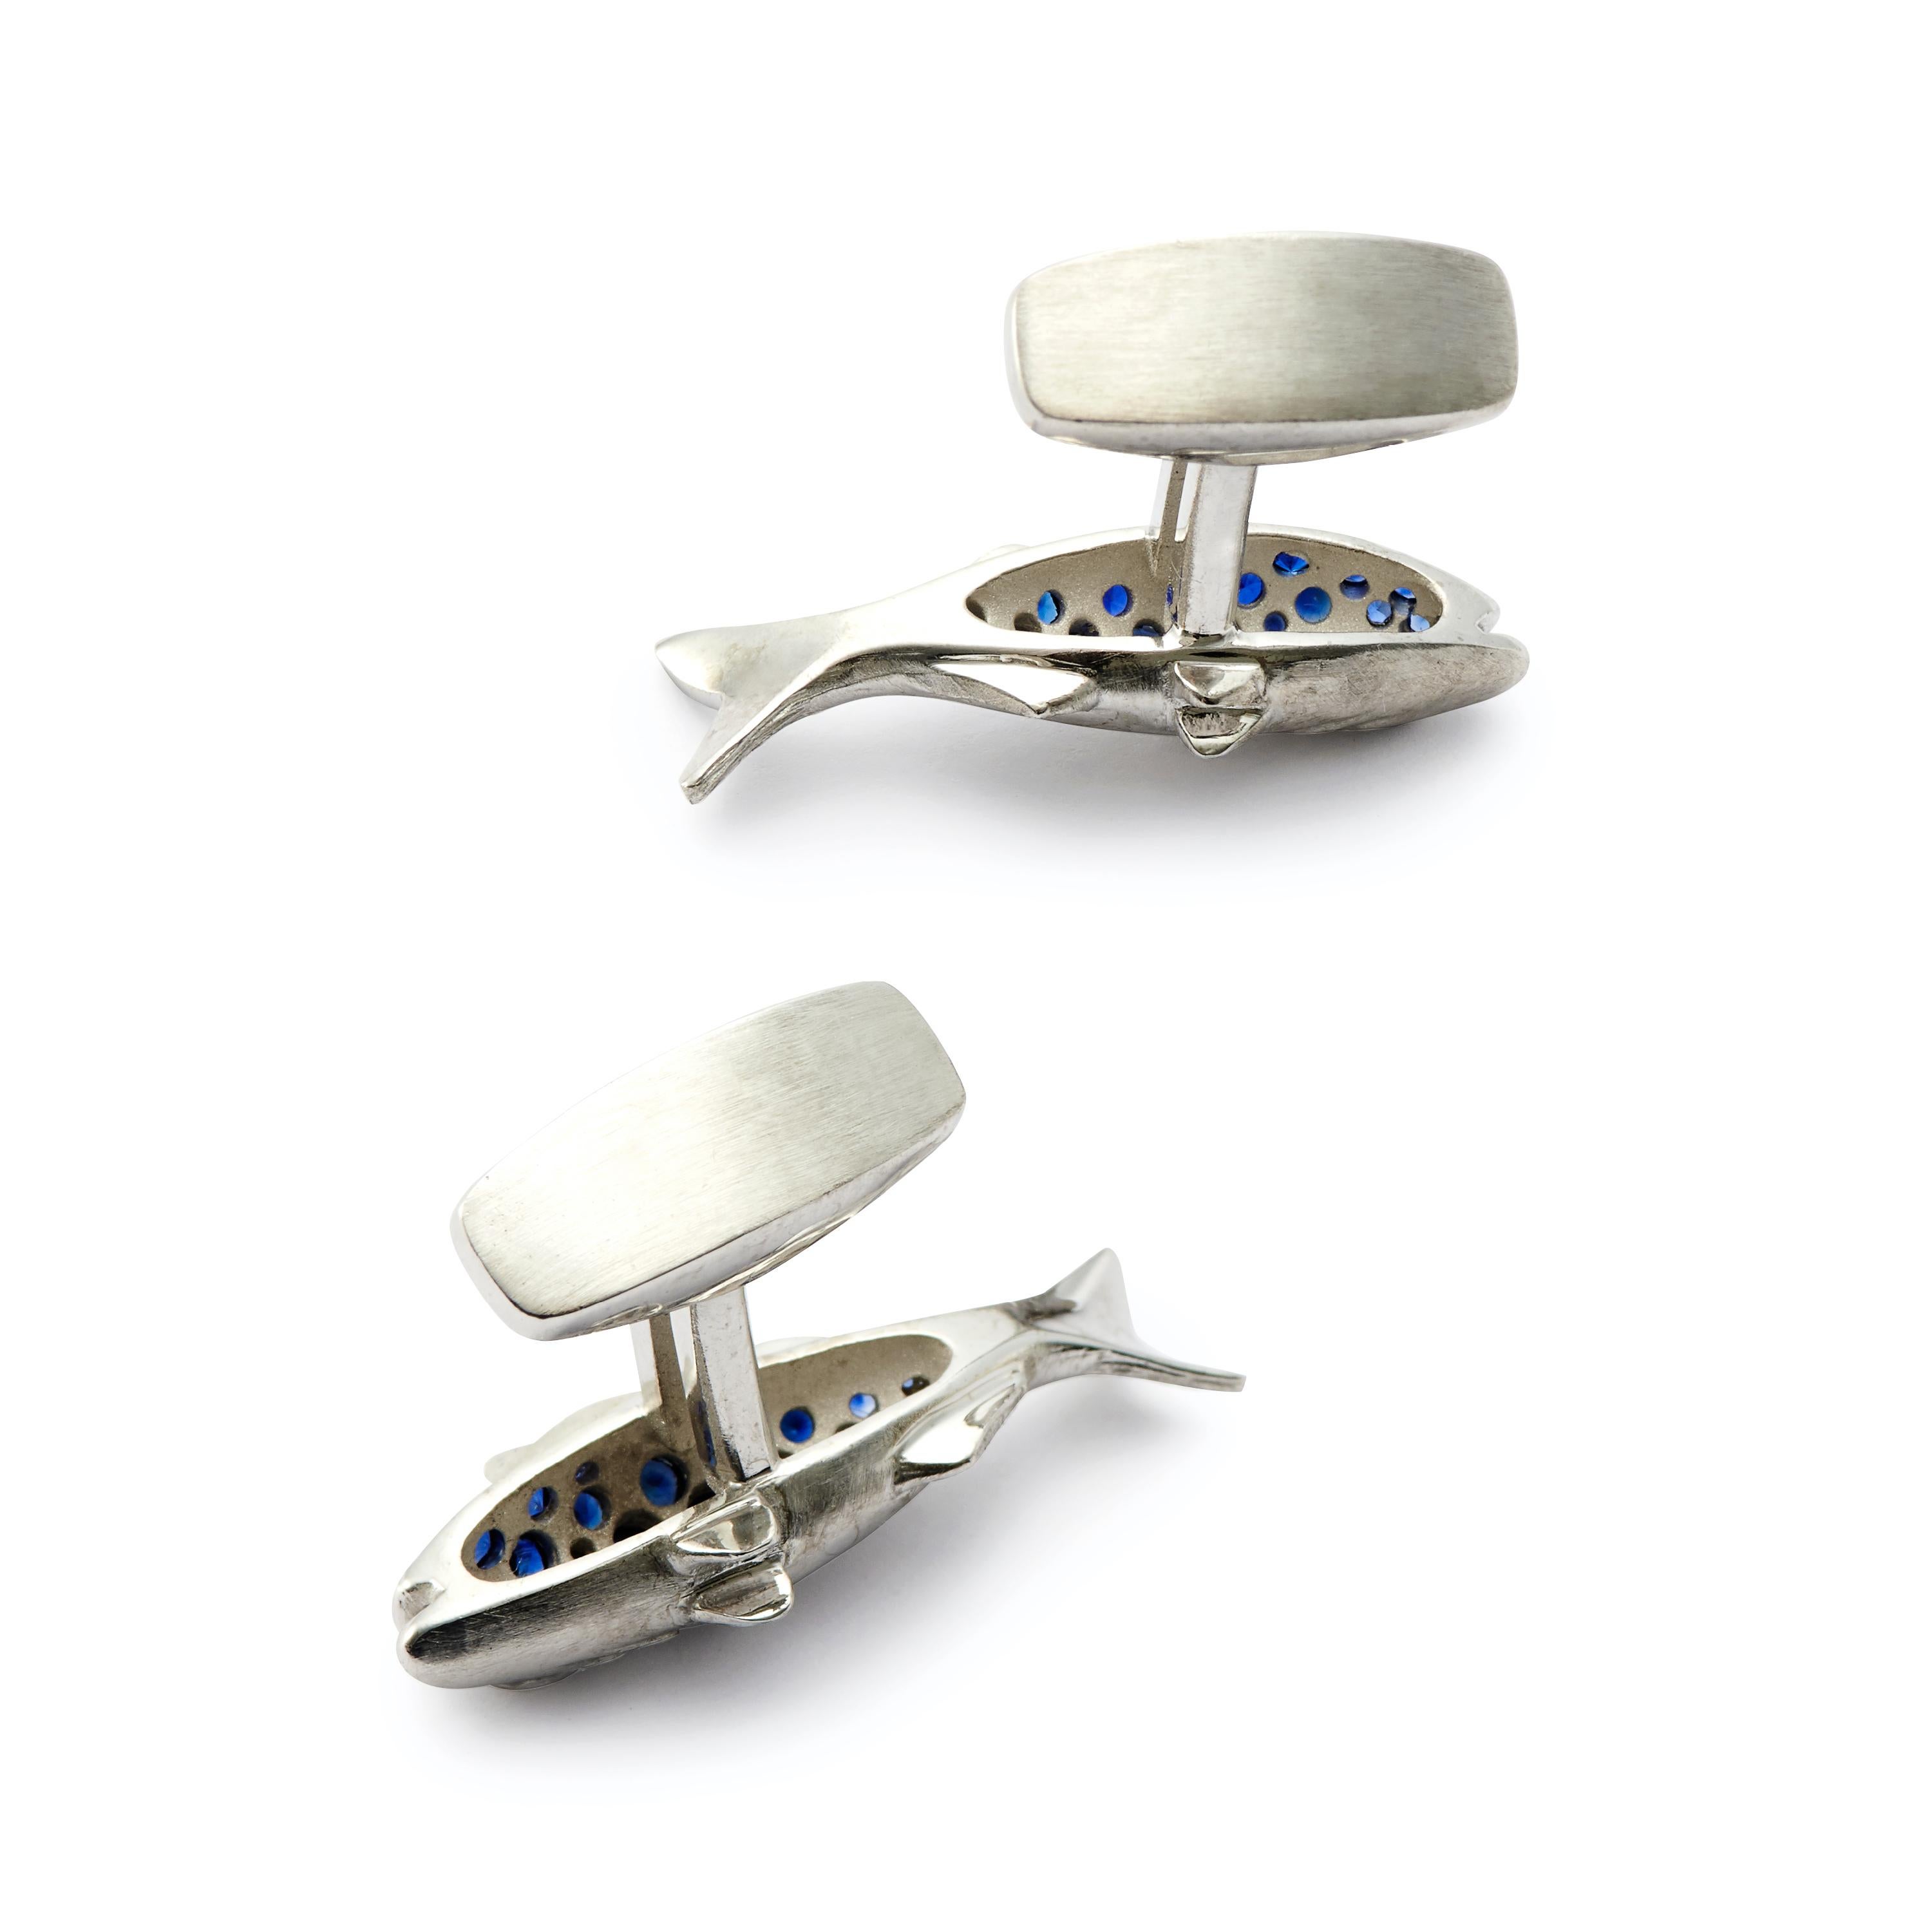 Nantucket Blues! For the sophisticated angler, Blue Sapphire (0.61 Carat) and 18 Karat Palladium White Gold cufflinks will be enjoyed and admired long after the sun goes down.

Also available in complementary pendants, in two sizes. A unique idea